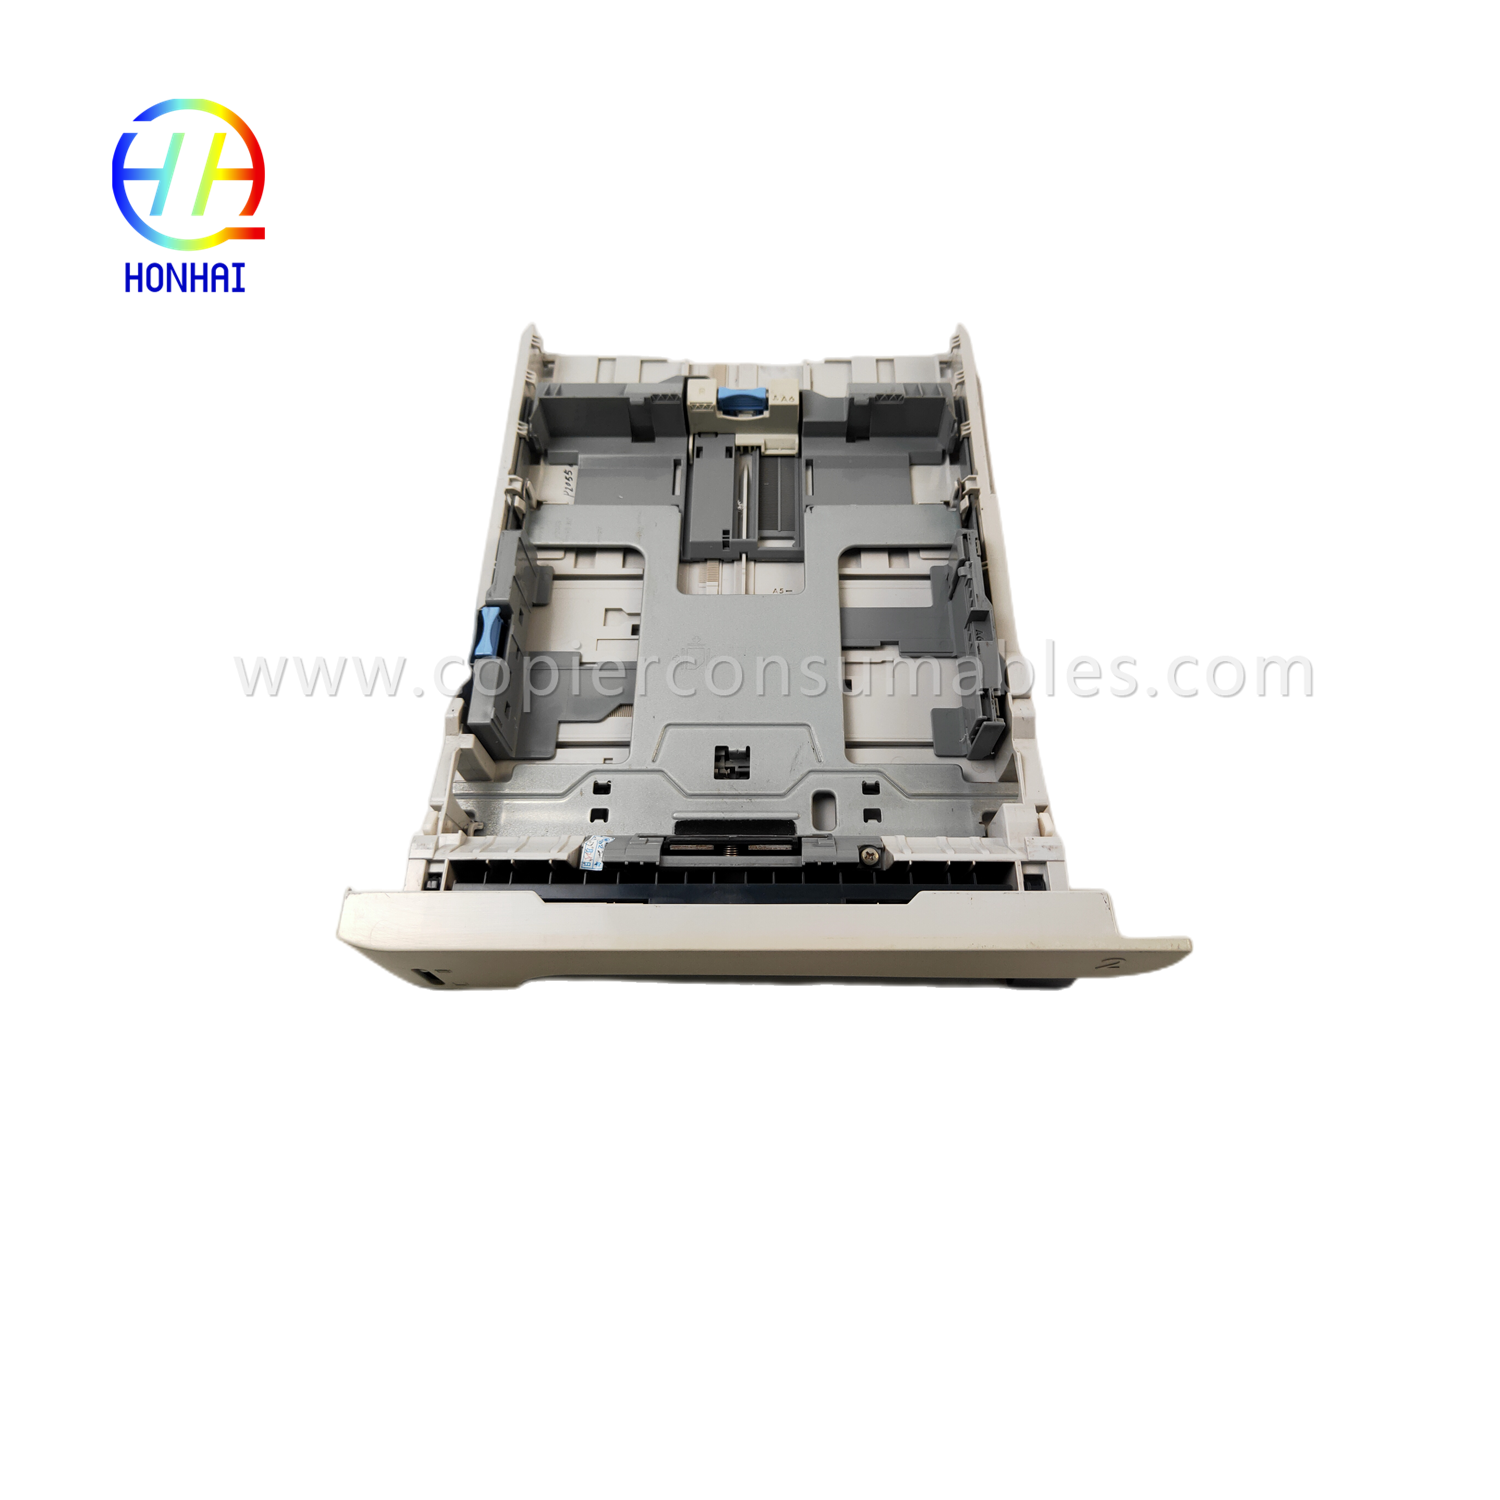 https://www.copierconsumables.com/paper-tray-assemble-for-xerox-phaser-3320dni-workcentre-3315dn-3325dni-050n00650-cassette-paper-tray-product/